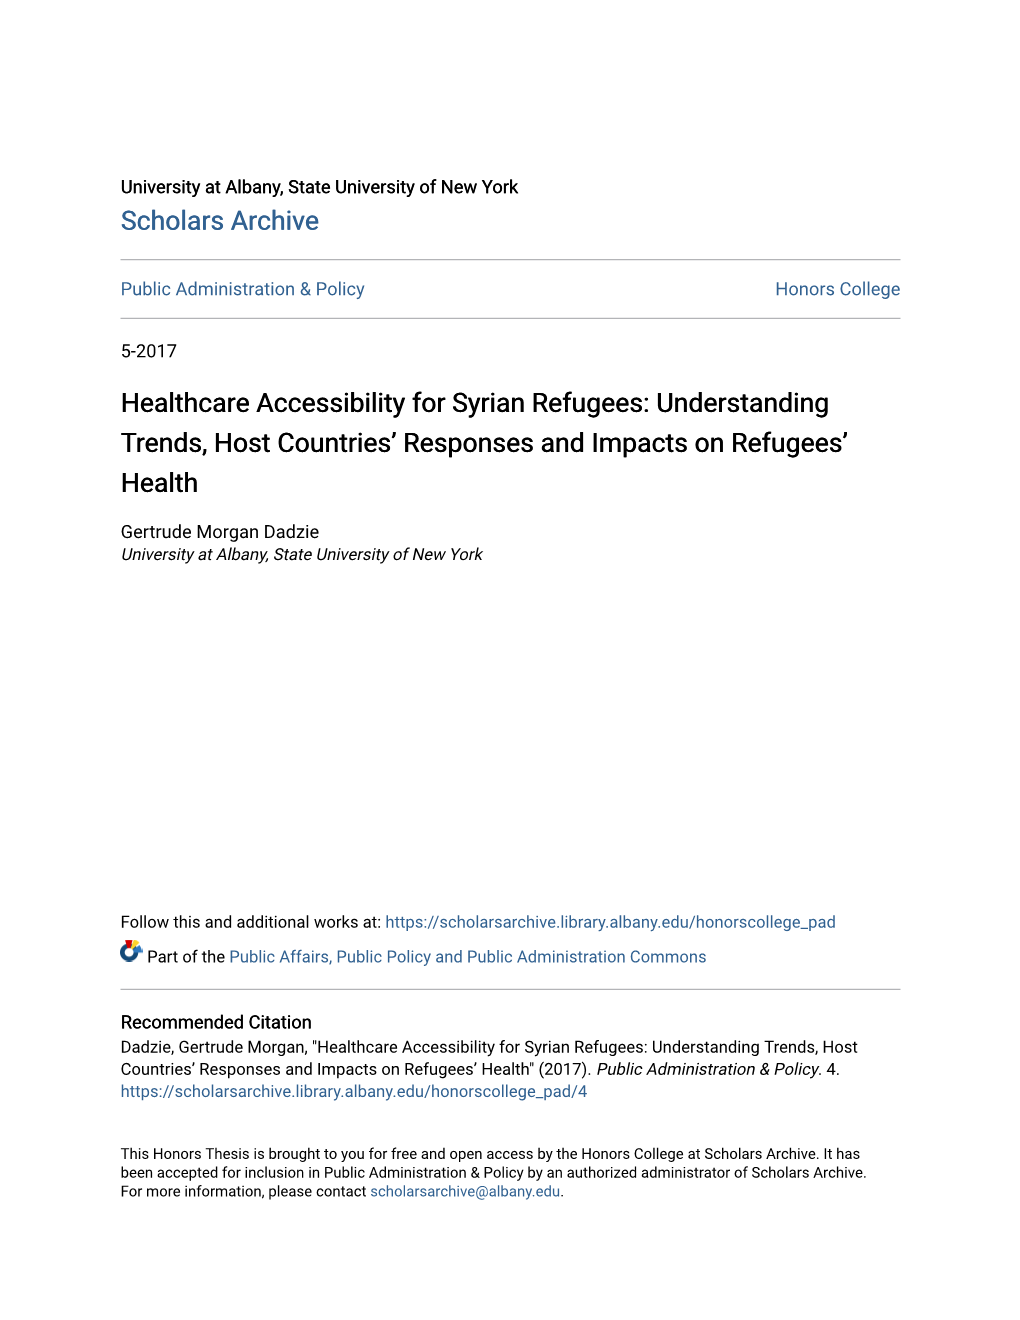 Healthcare Accessibility for Syrian Refugees: Understanding Trends, Host Countries’ Responses and Impacts on Refugees’ Health